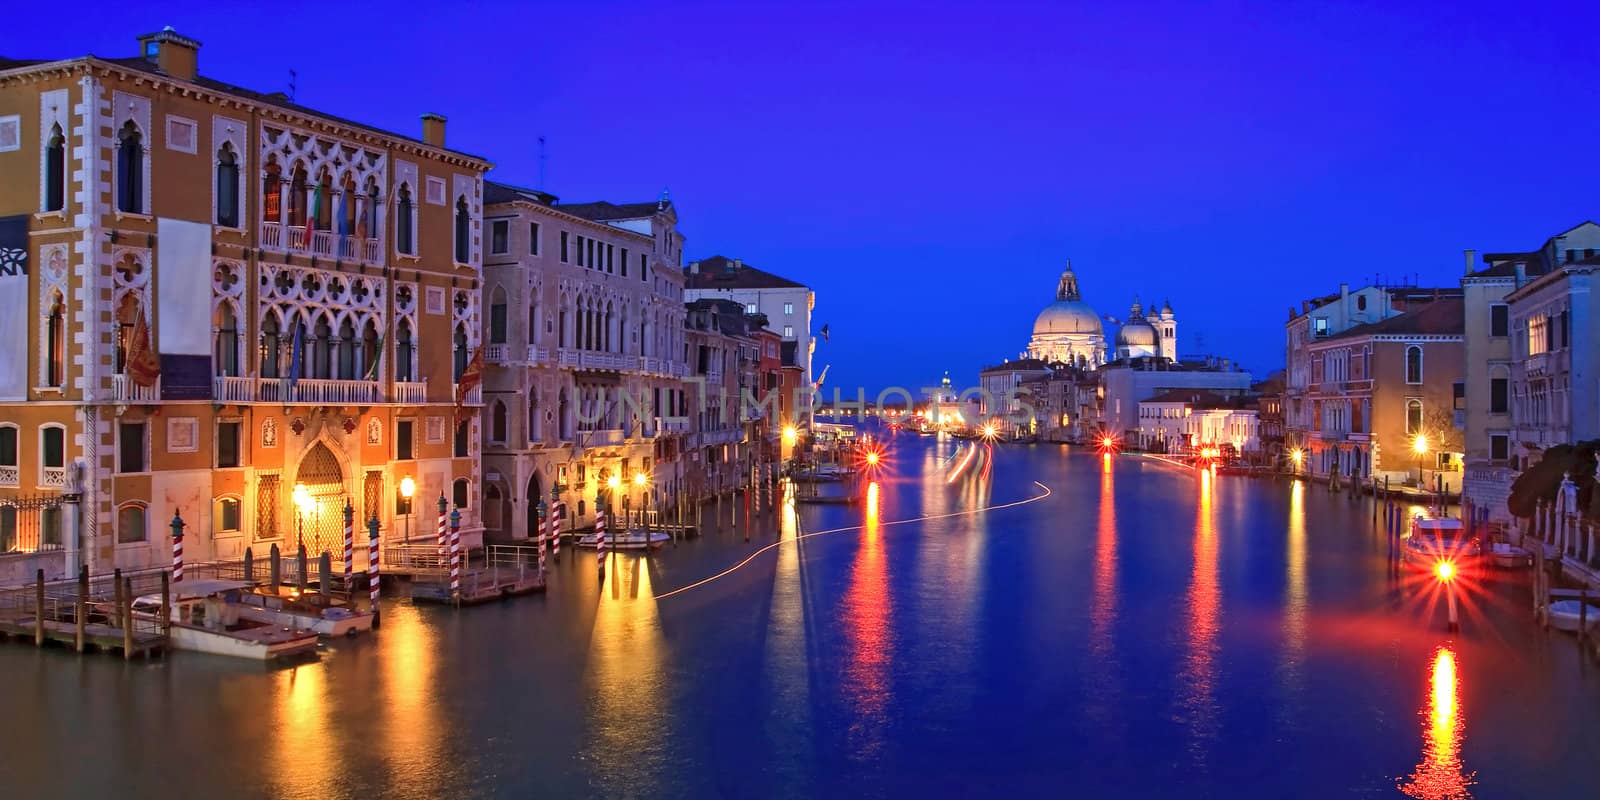 panoramic view of Grand canal Venice Italy.